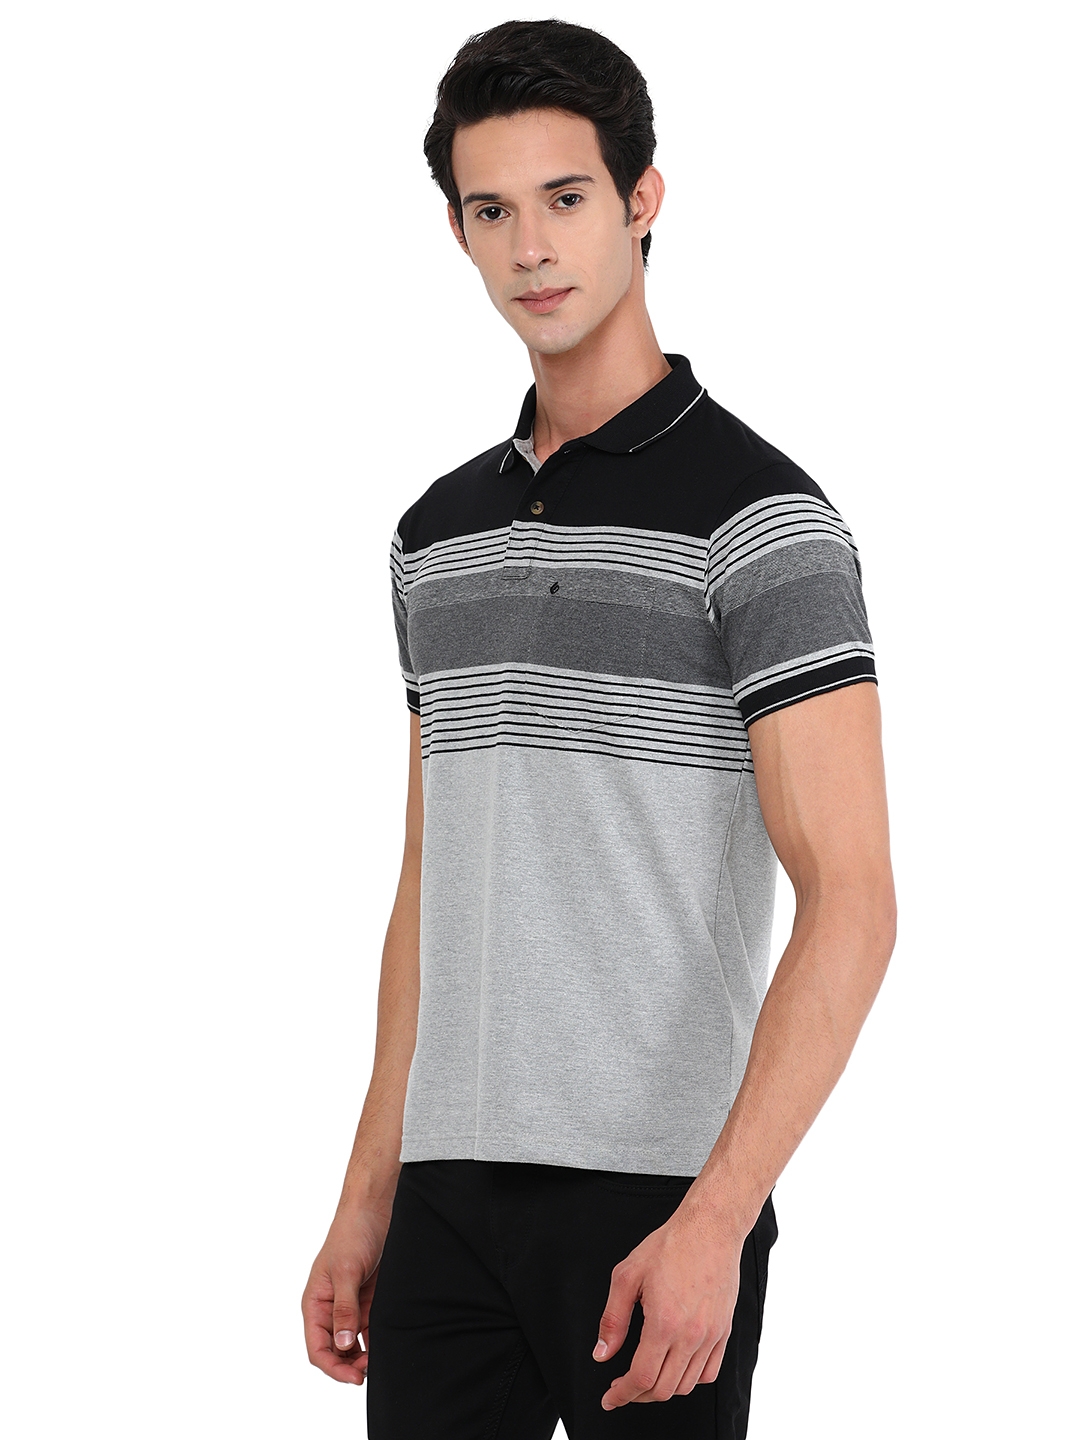 Greenfibre | Caster Grey Striped Slim Fit Polo T-Shirt | Greenfibre 1